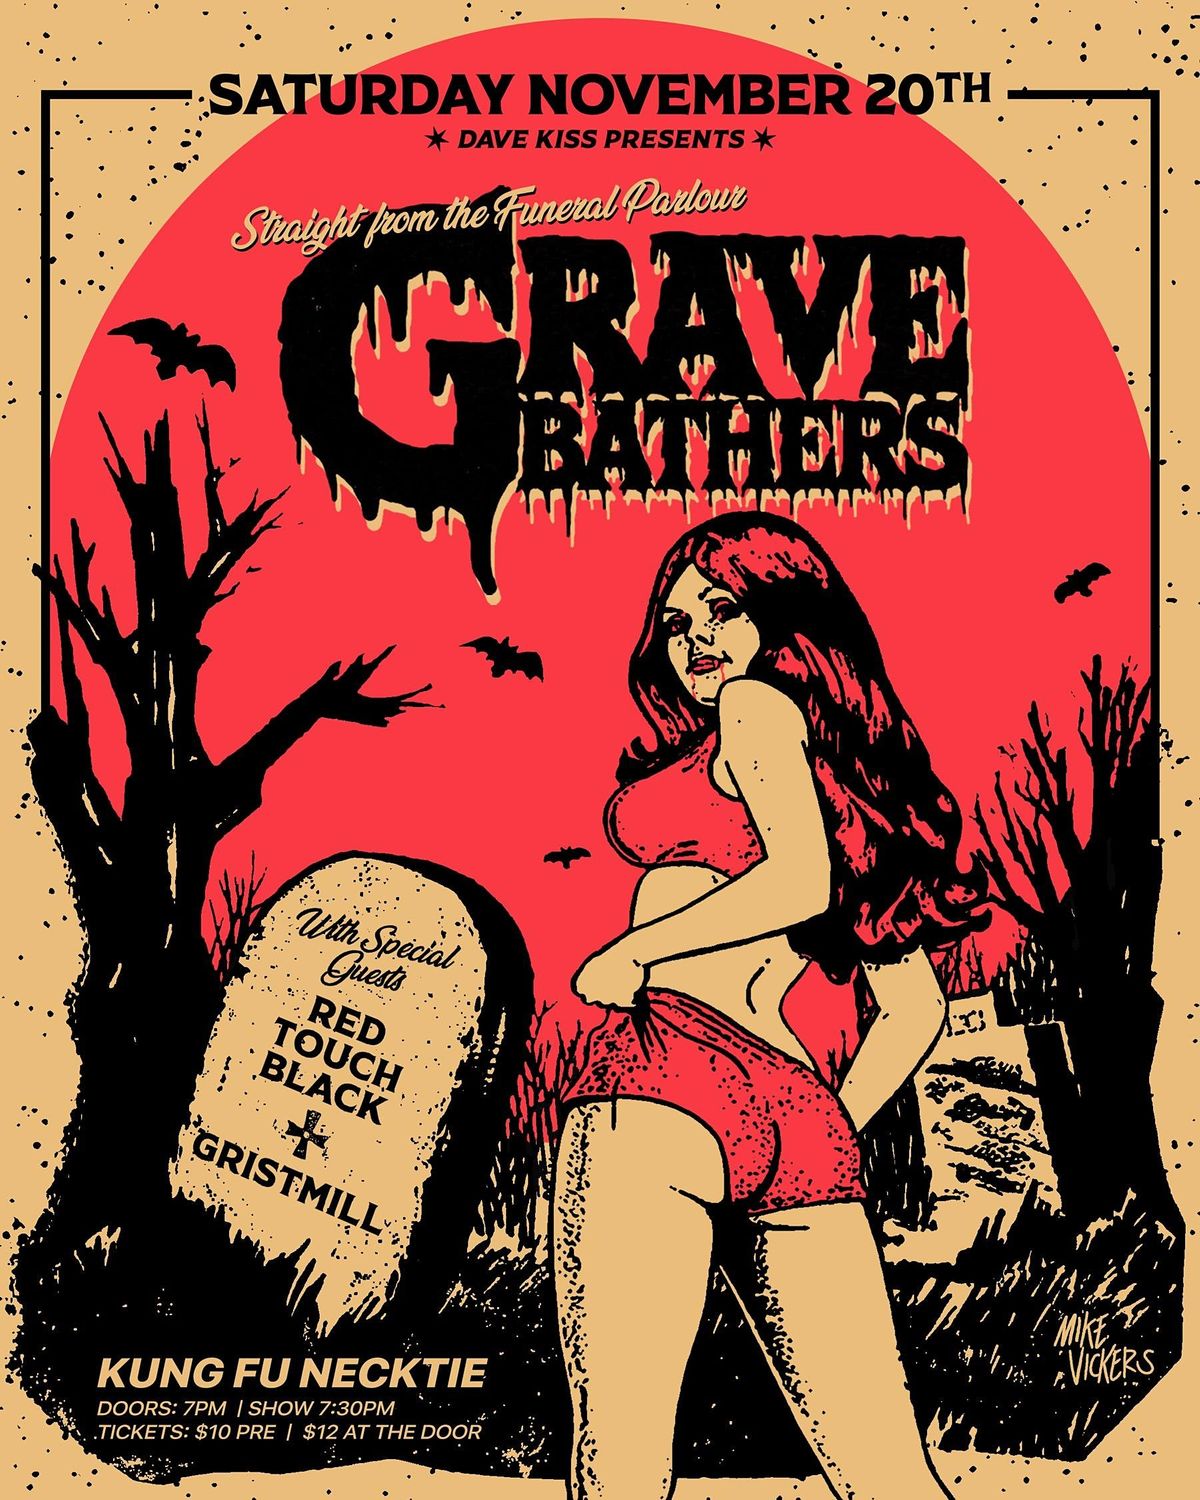 Gravebathers ~ Red Touch Black ~ Gristmill